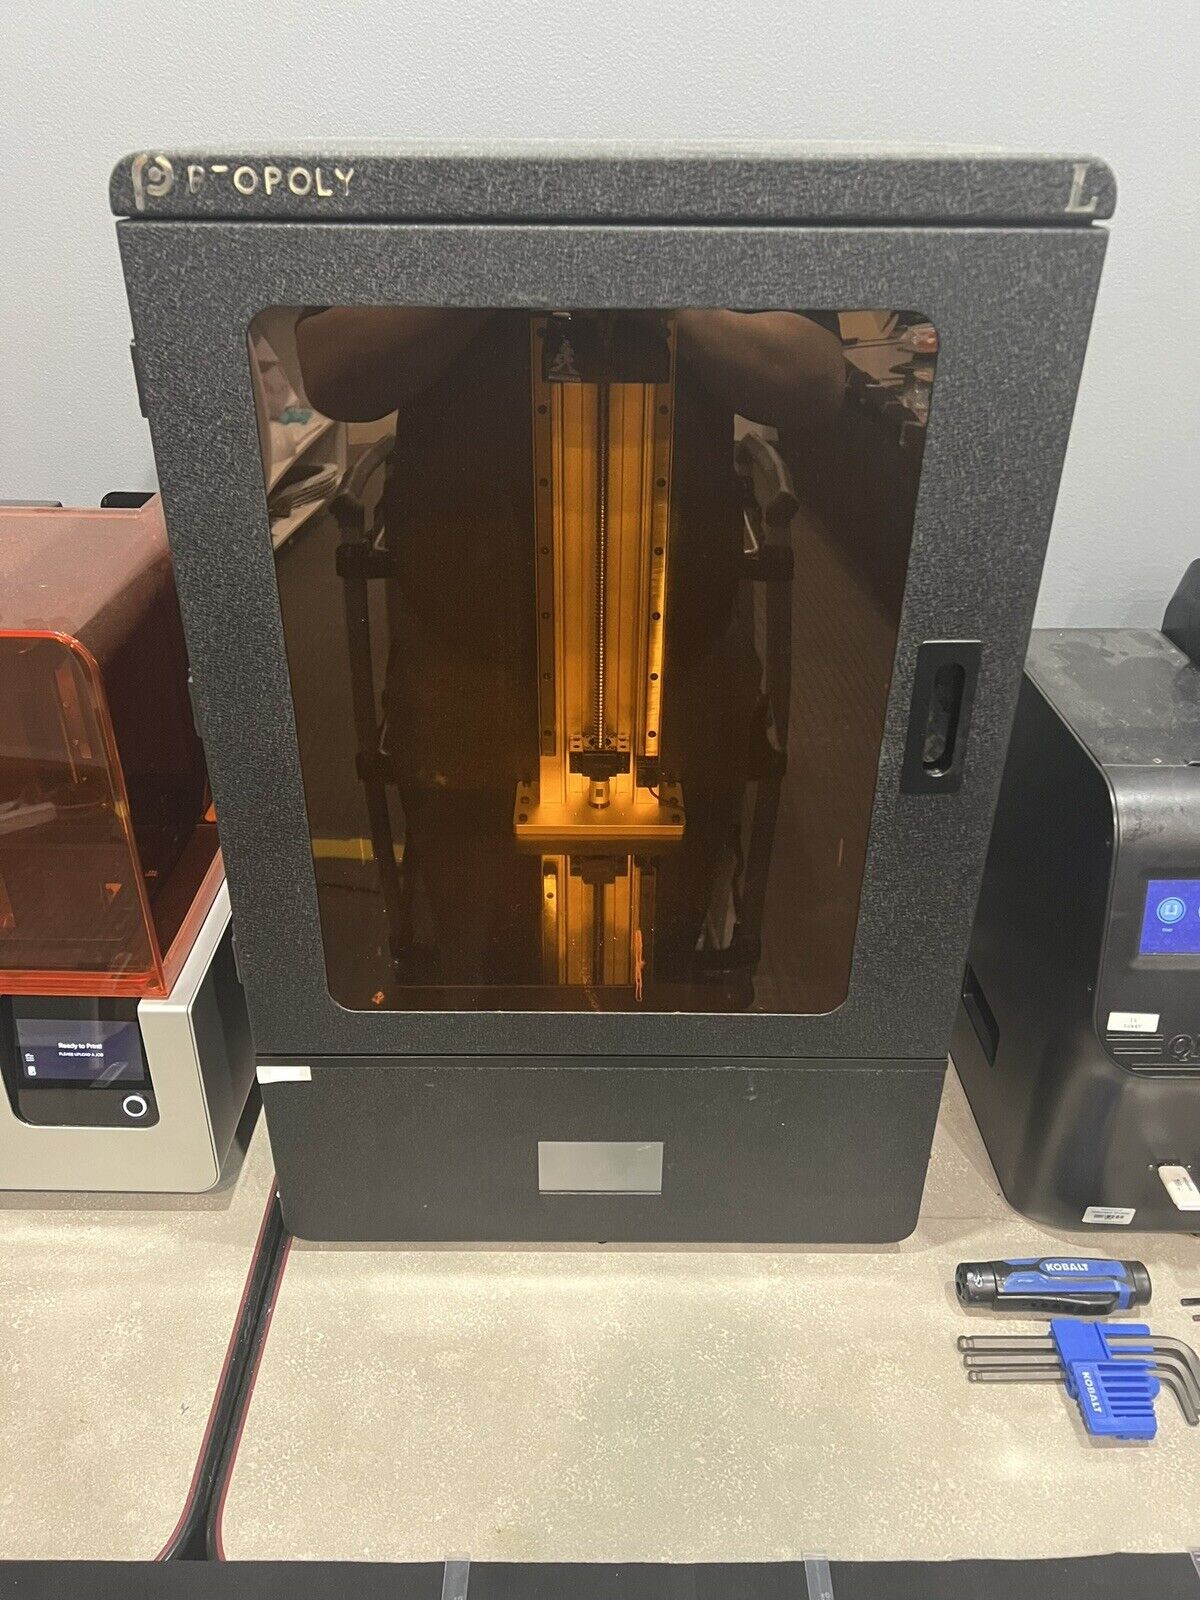 Peopoly Phenom Large-Format MSLA 3D Printer - Used in great working condition